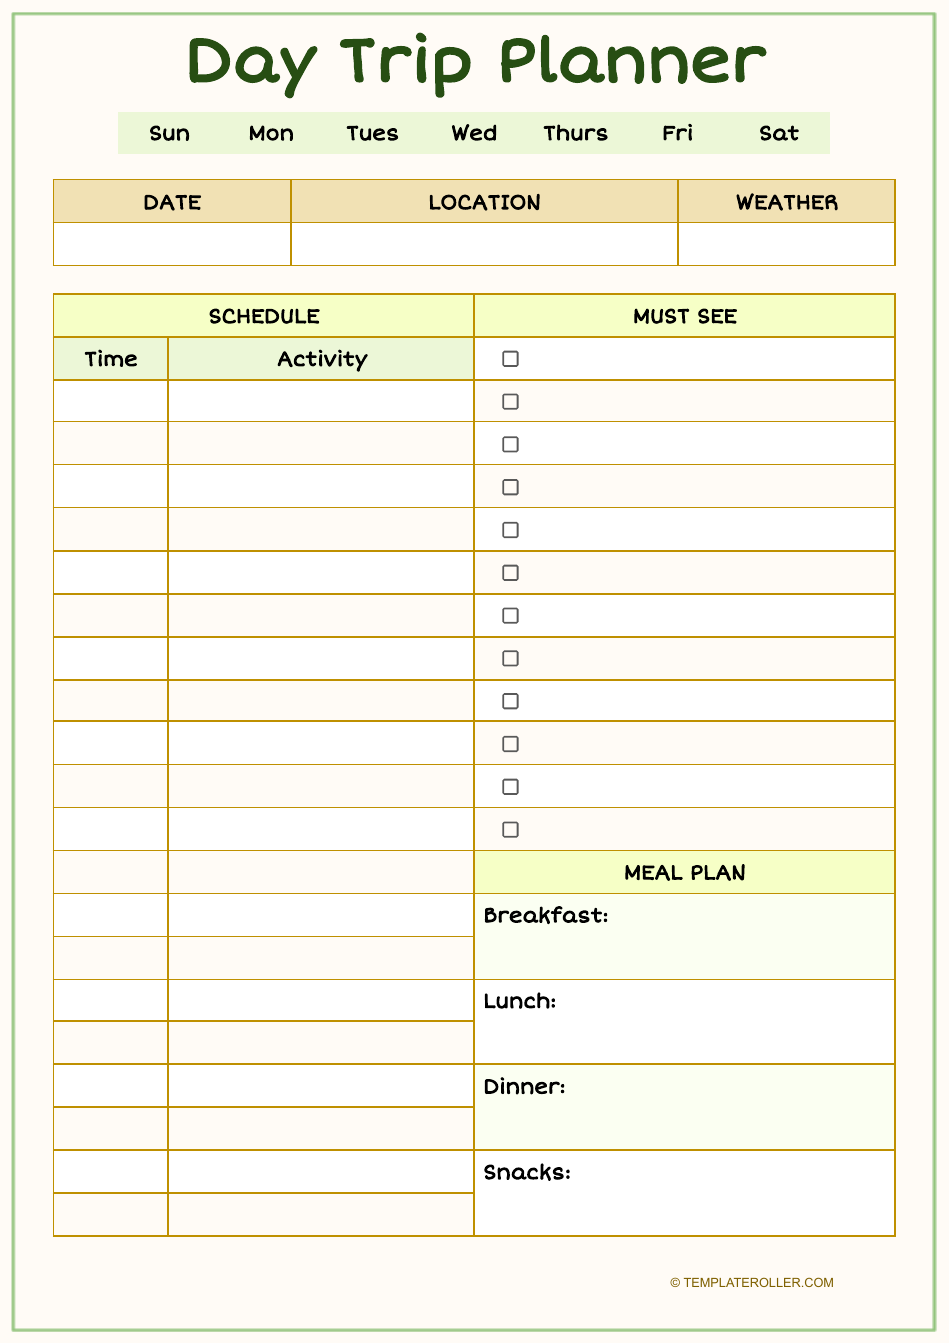 Day Trip Planner Template Preview